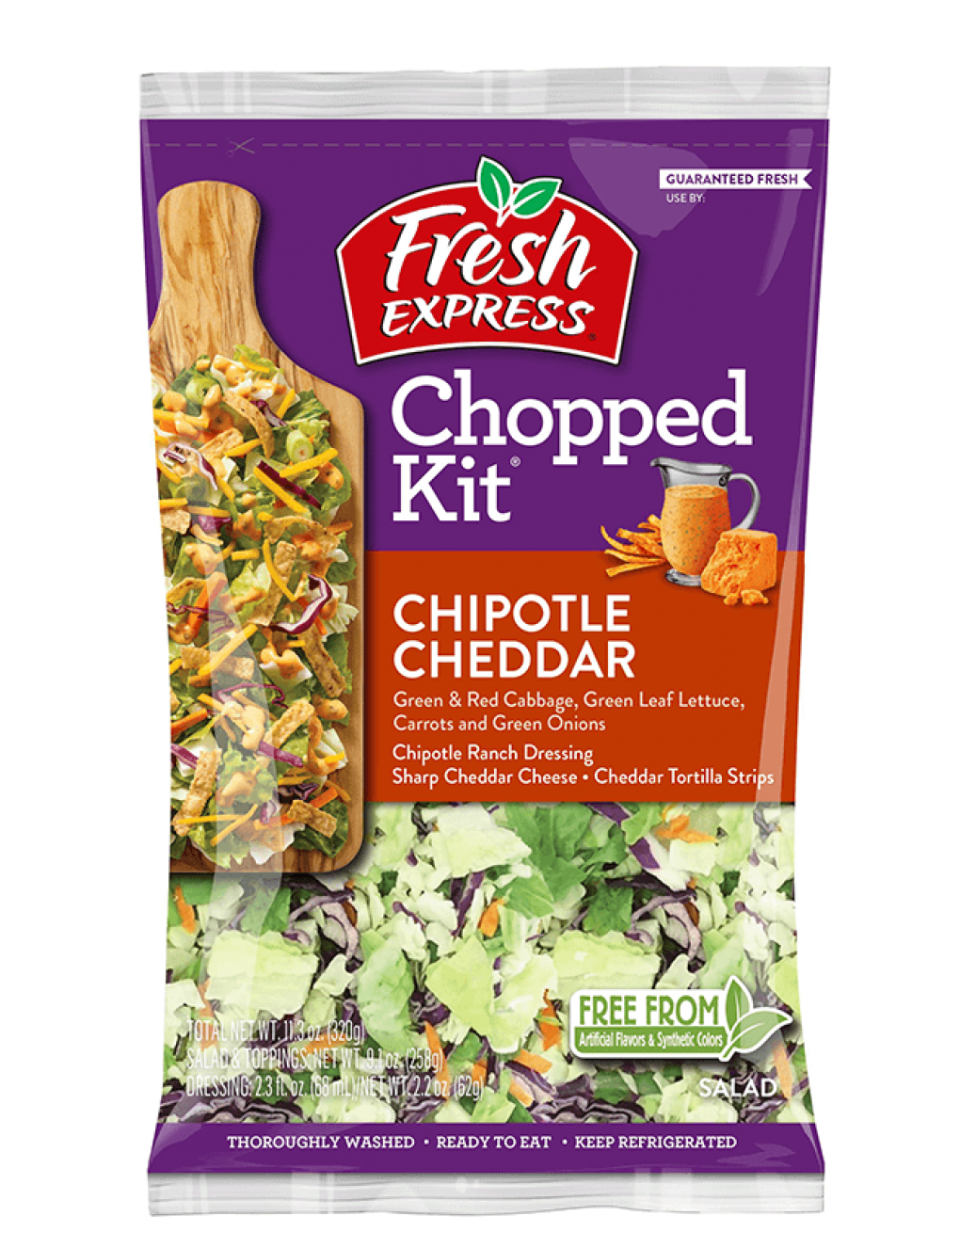 Fresh Express Incorporated is voluntarily recalling a limited quantity of three varieties of already-expired branded and private label salad kit products produced at the company’s Morrow, Georgia facility out of an abundance of caution due to a possible health risk from Listeria monocytogenes.